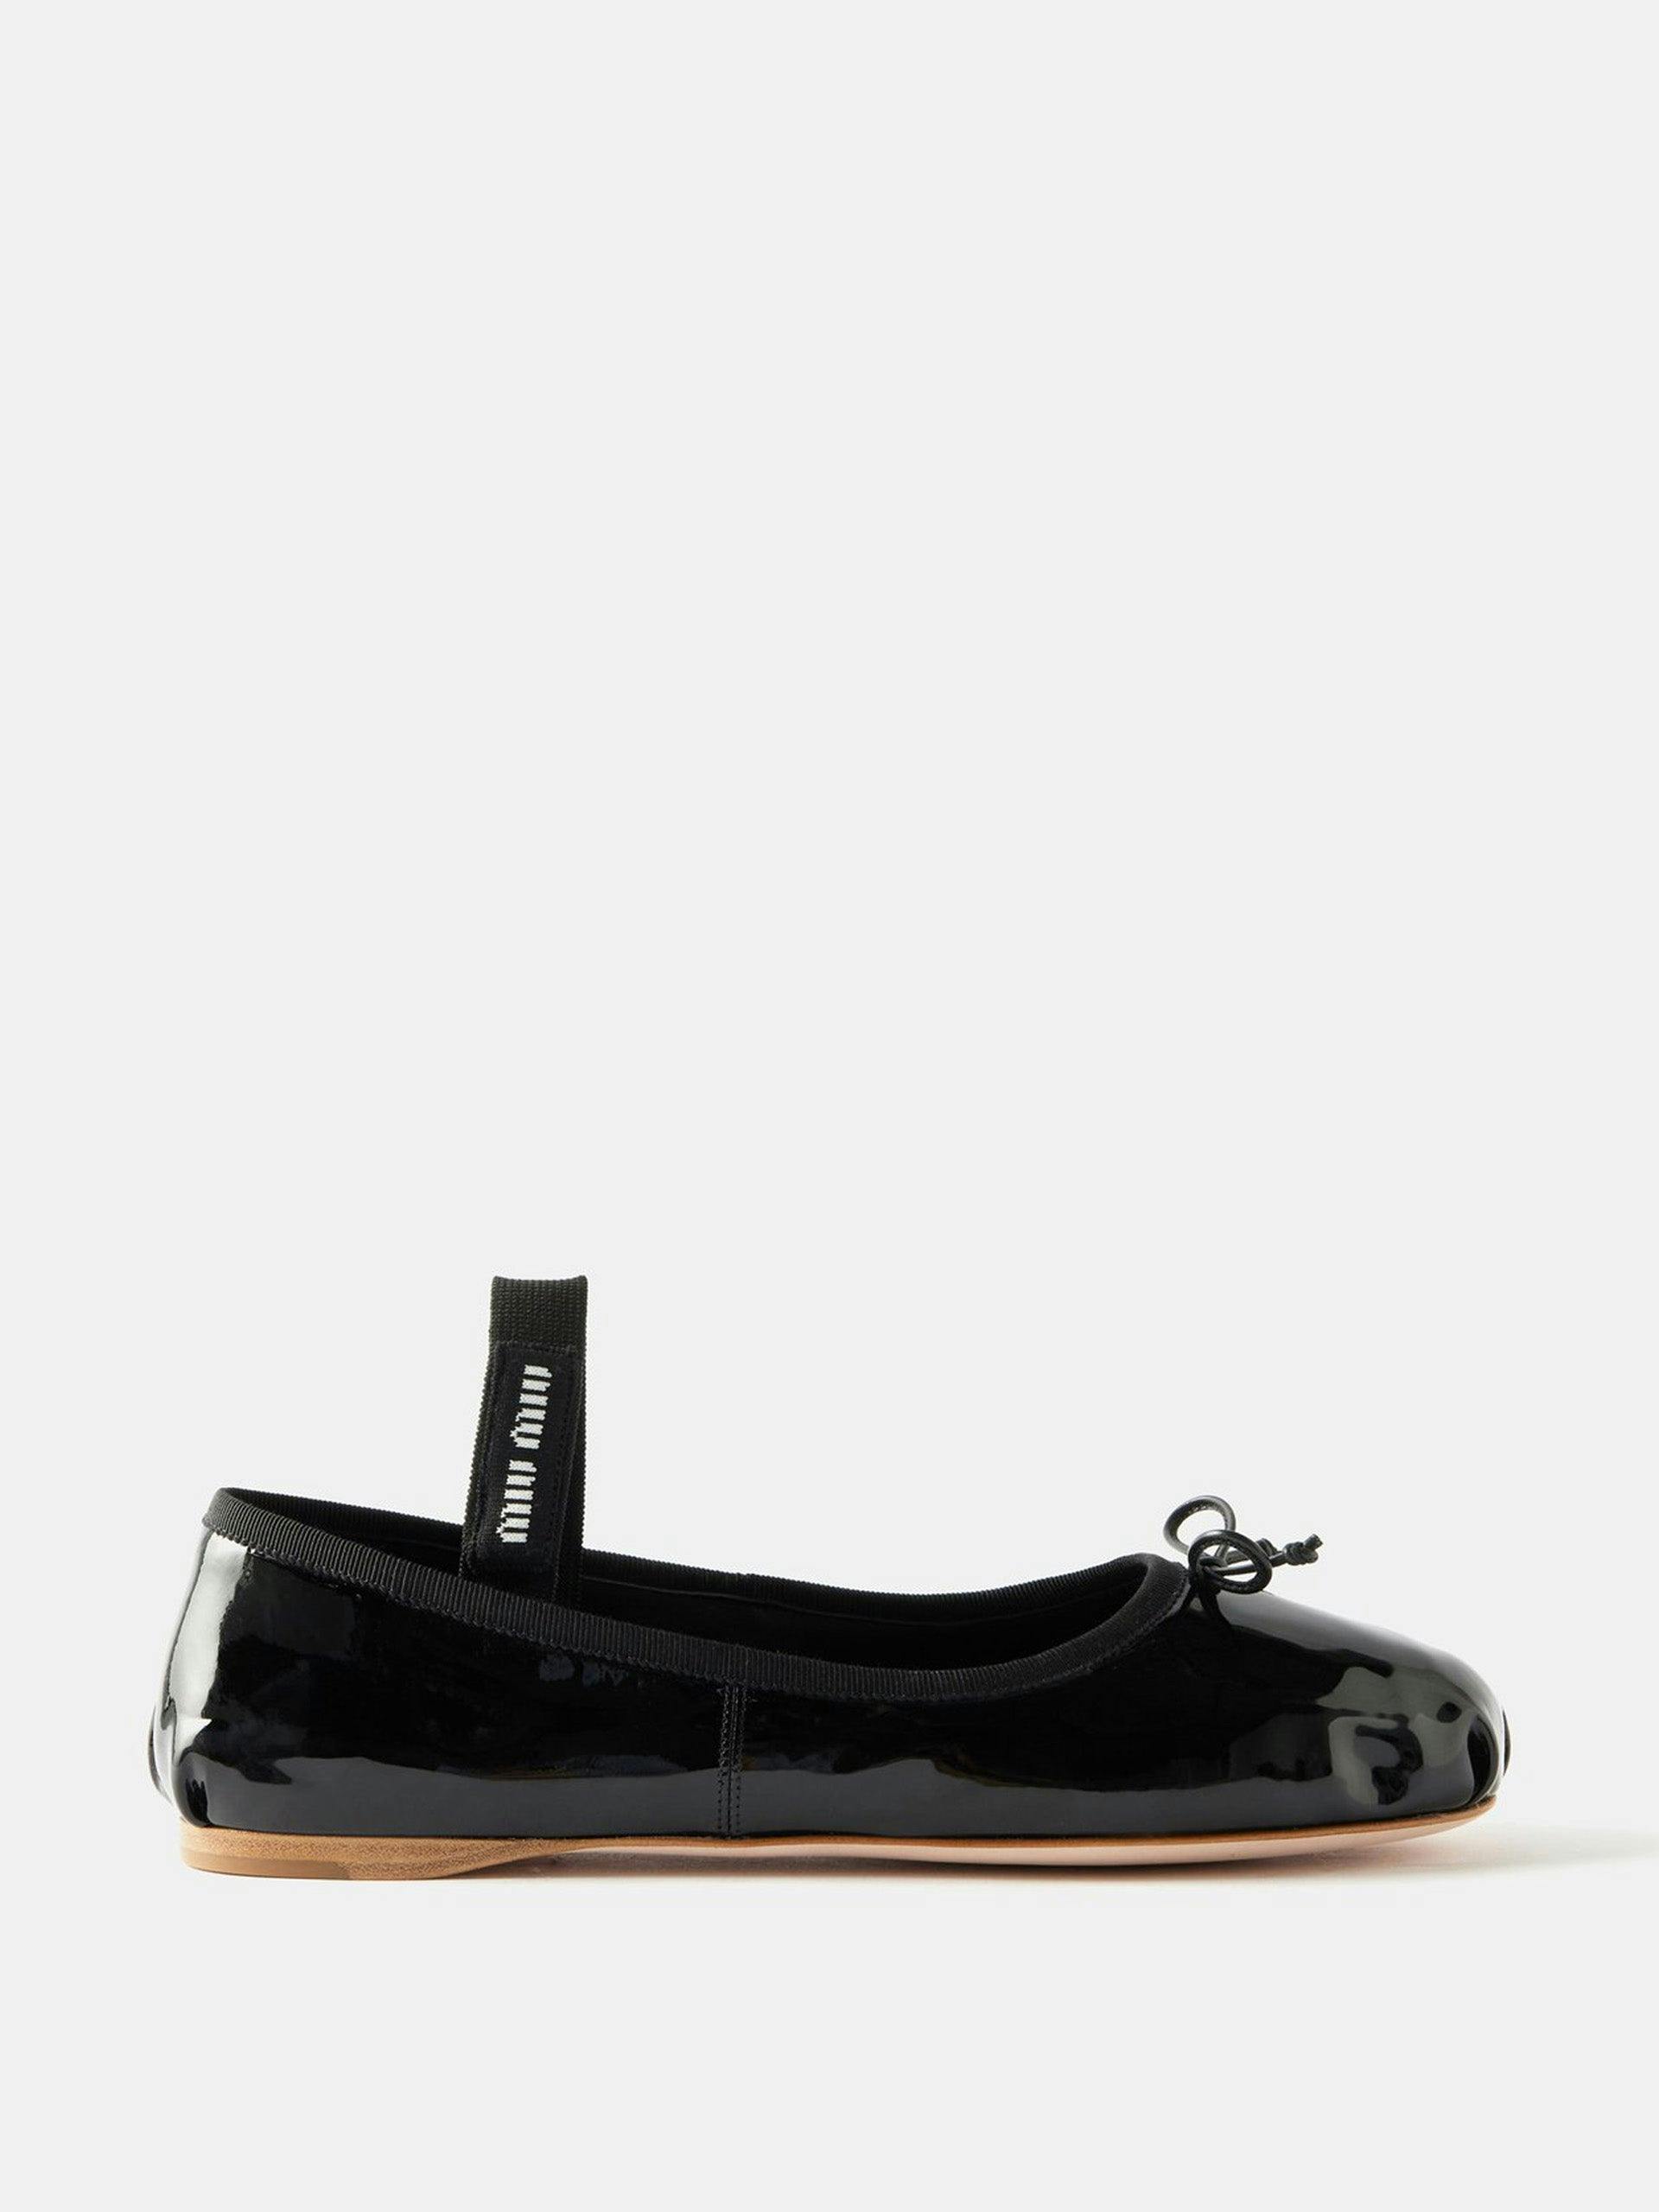 Patent-leather ballet flats